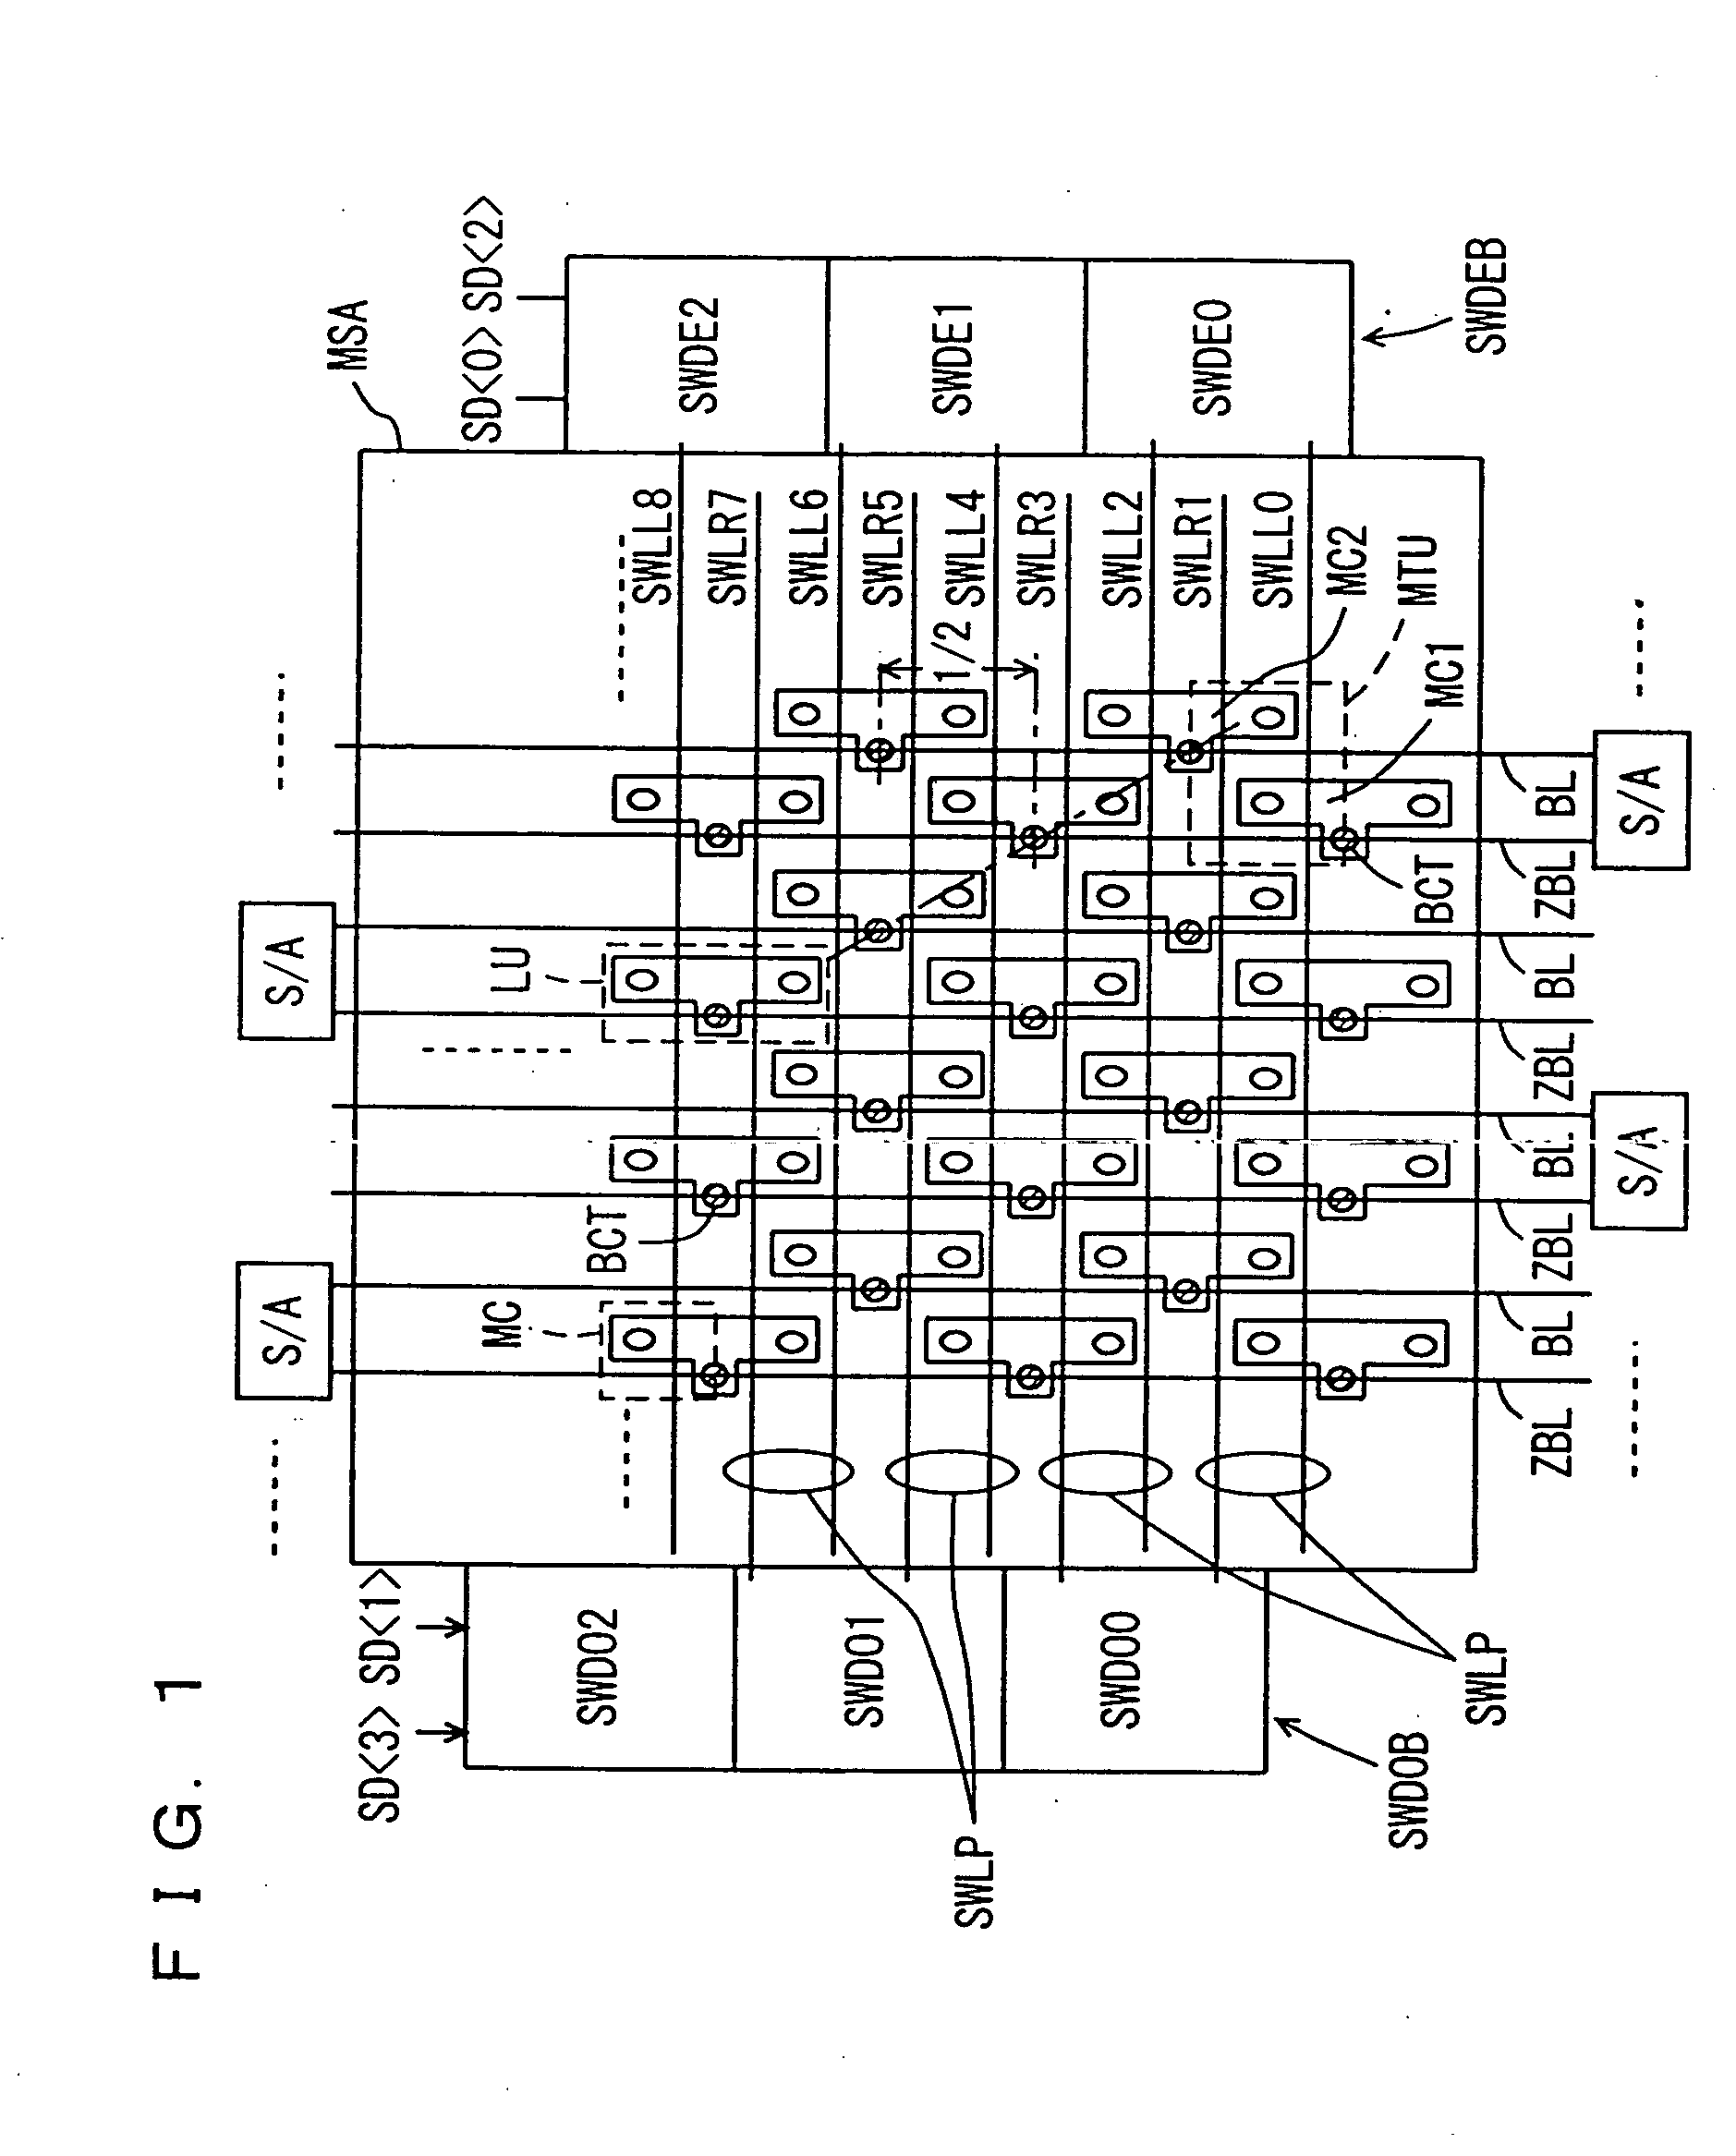 Refresh-free dynamic semiconductor memory device